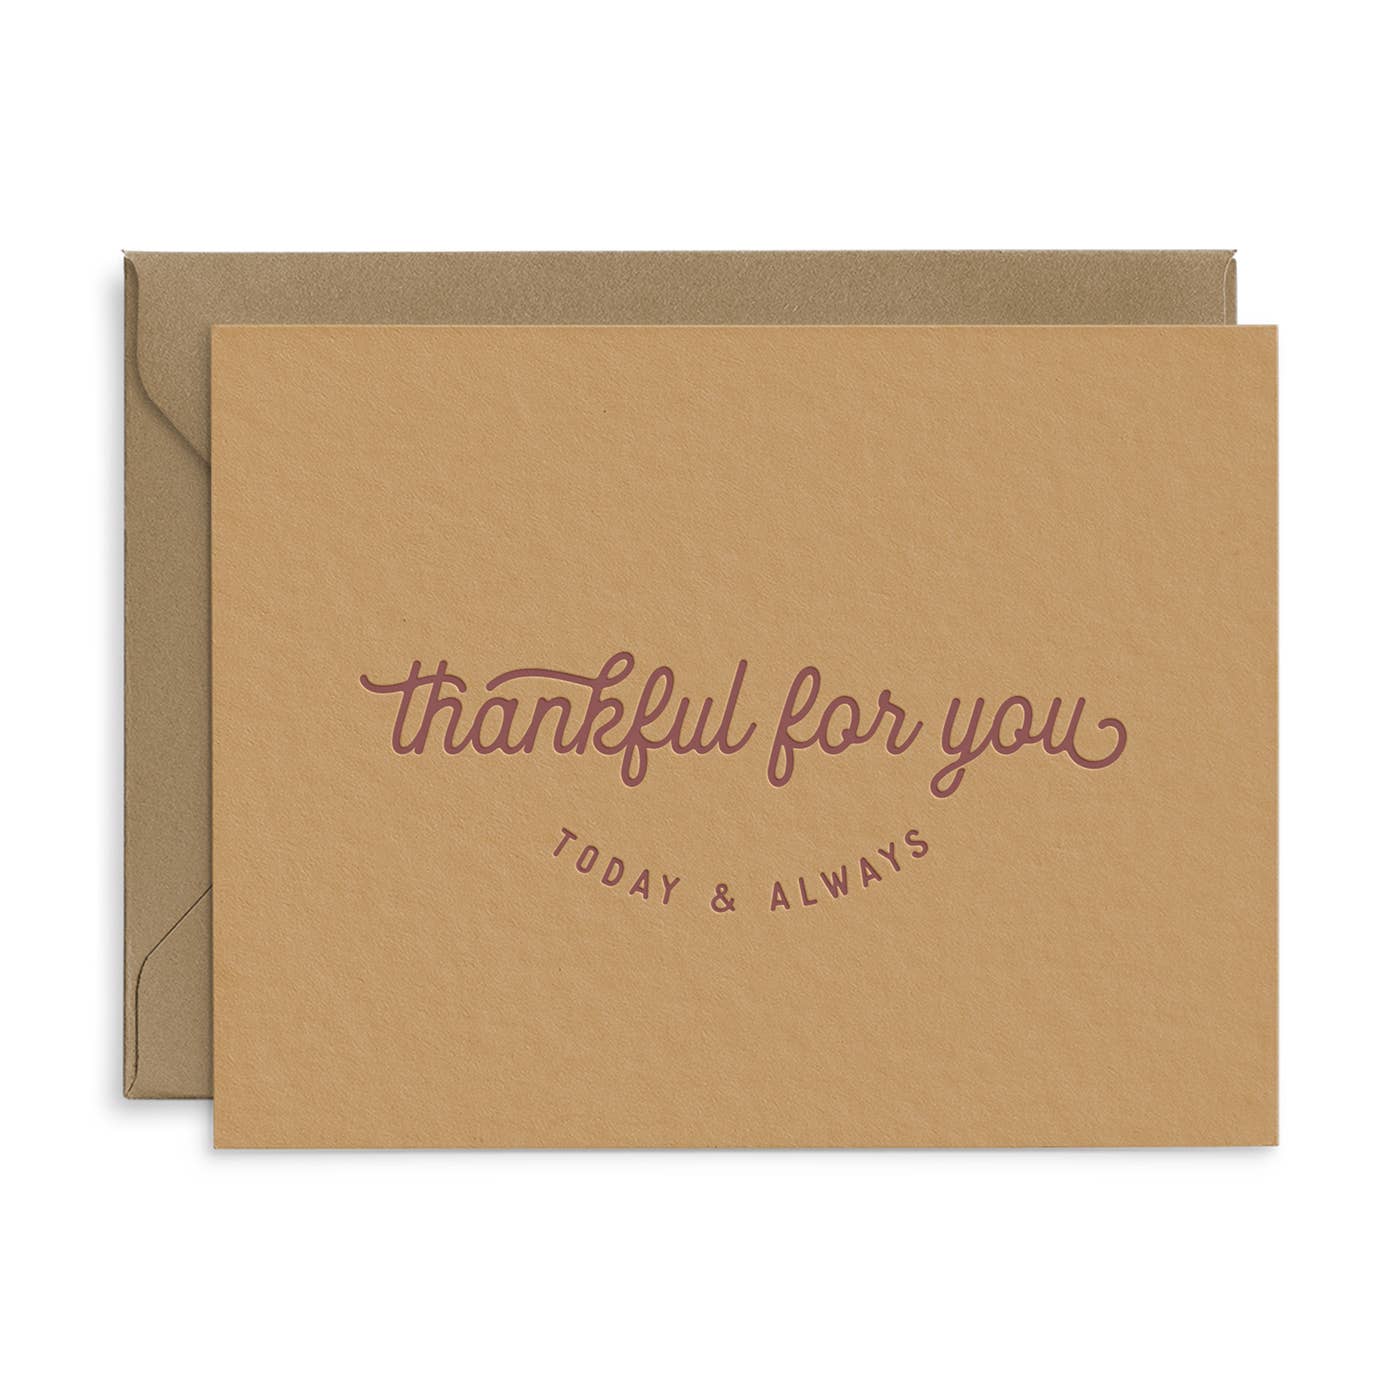 Thankful For You Card Box Set